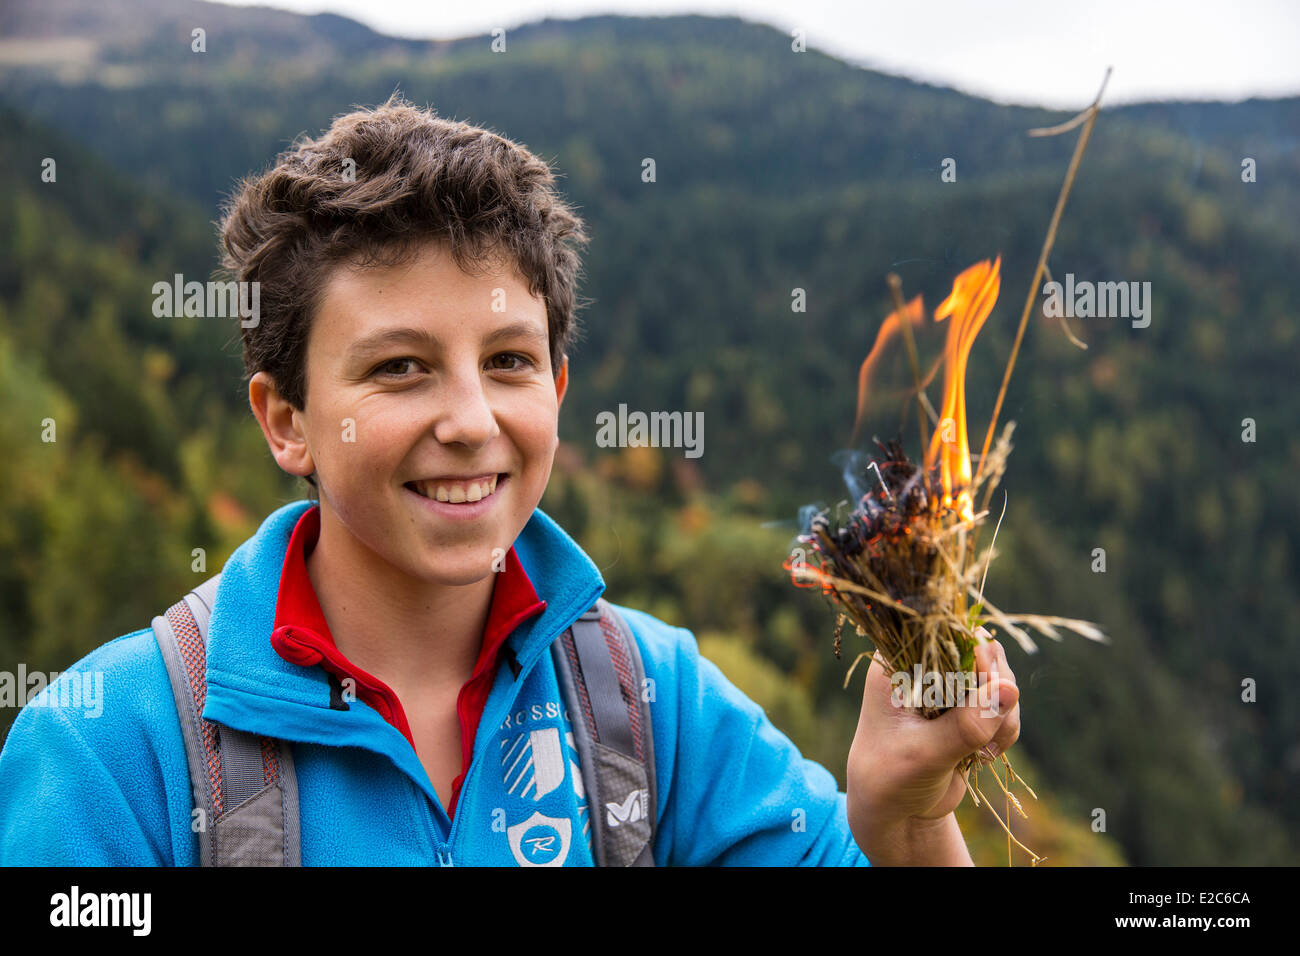 France, Savoie, Notre Dame du Pre, adolescent playing with the fire Stock Photo